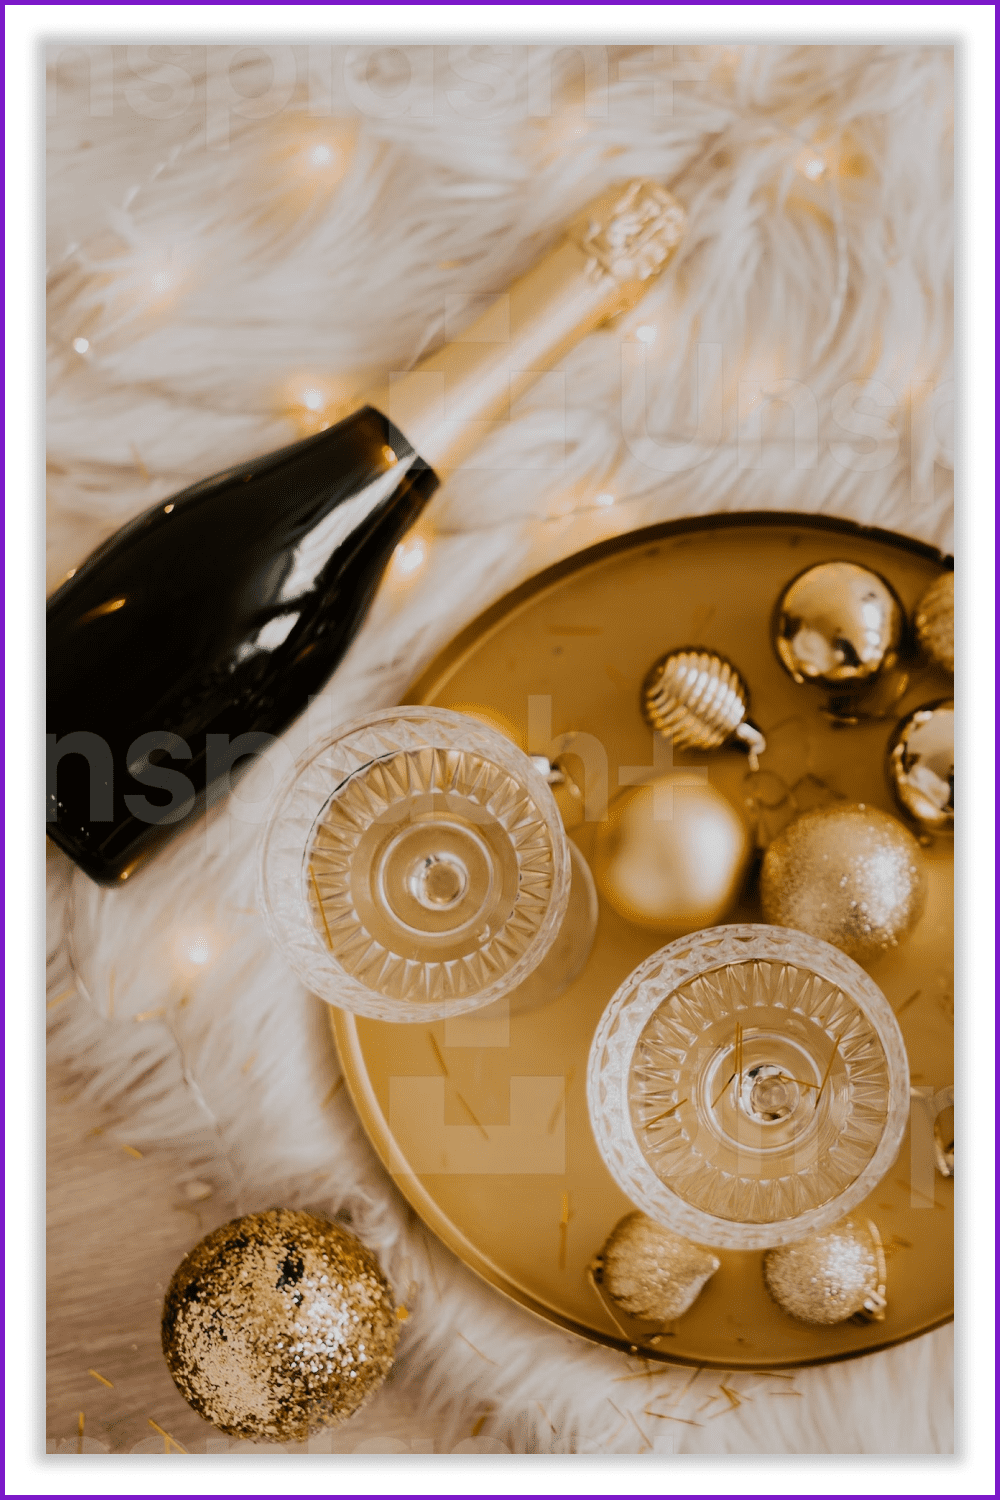 Top view of champagne bottle and tray with glasses and christmas decorations.